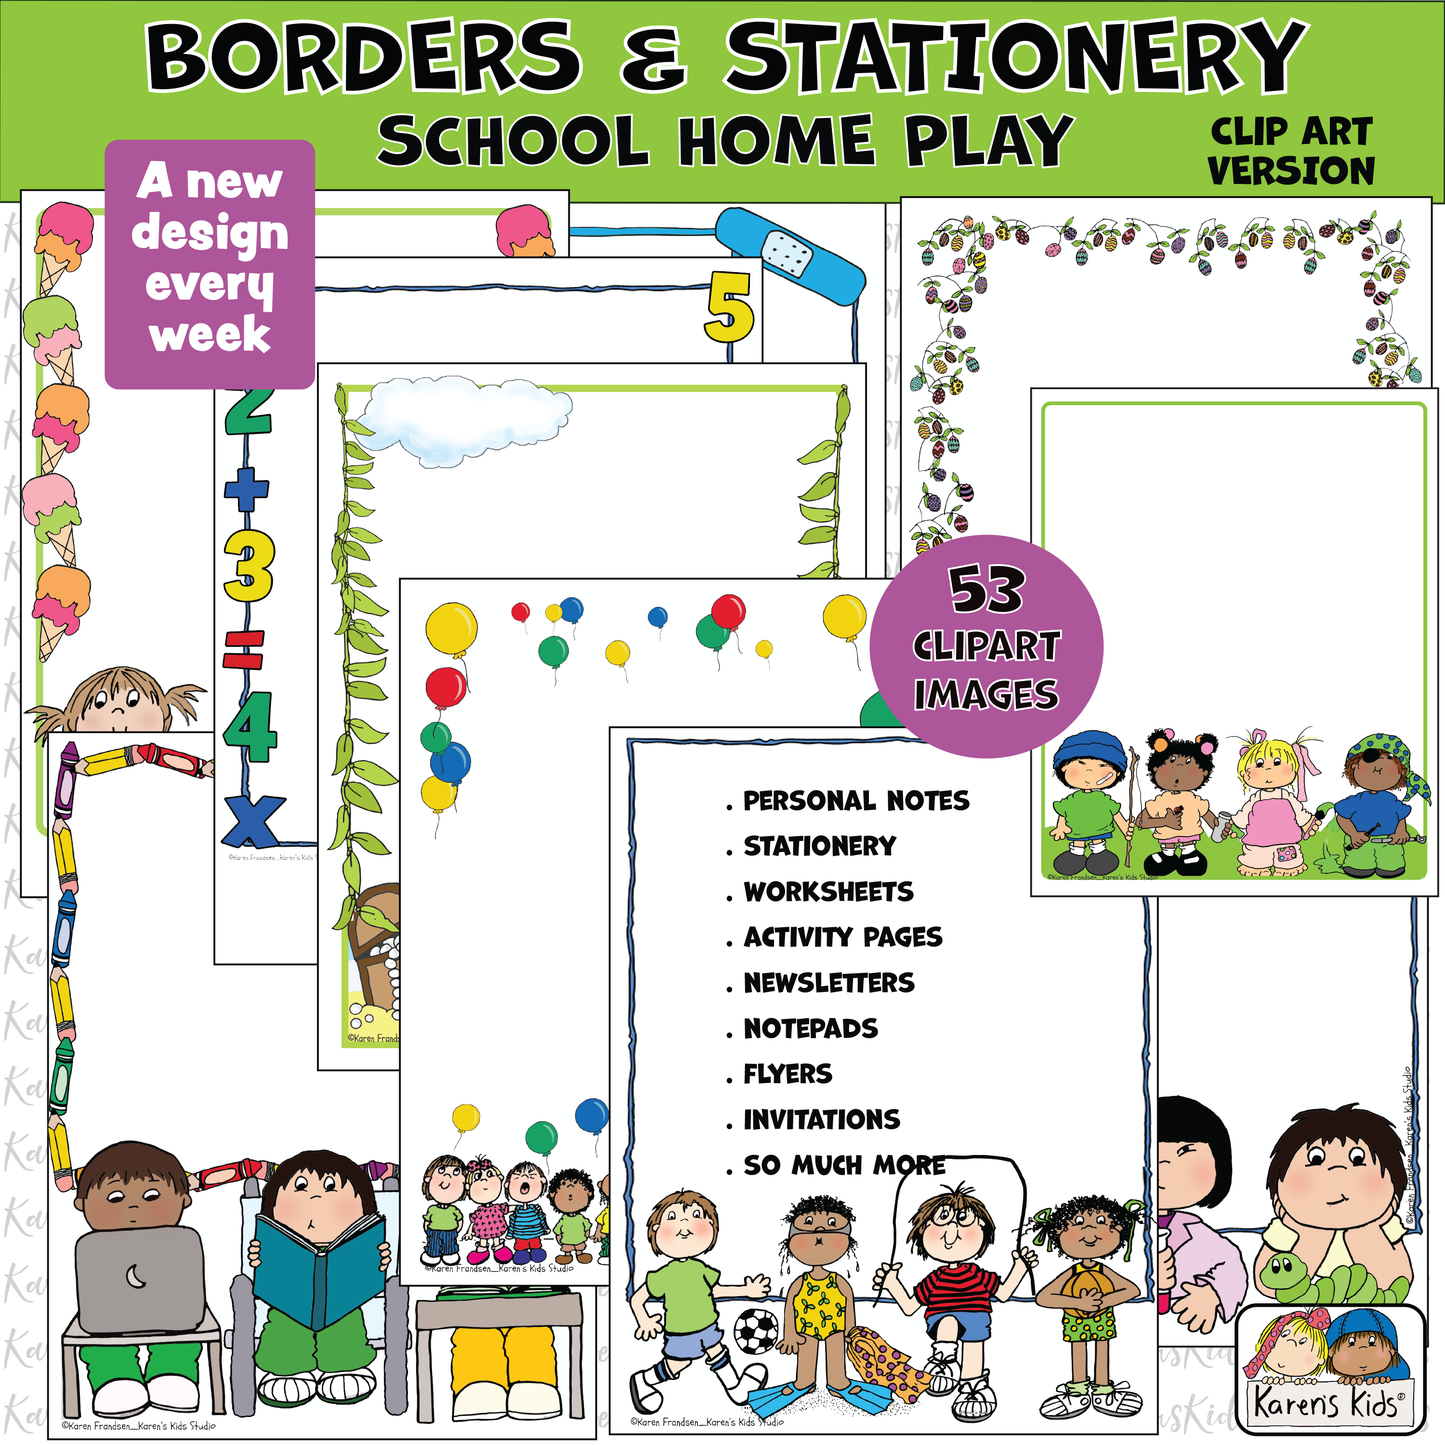 Color images of pages from Karen's Kids School Home Play Borders and Stationery set.